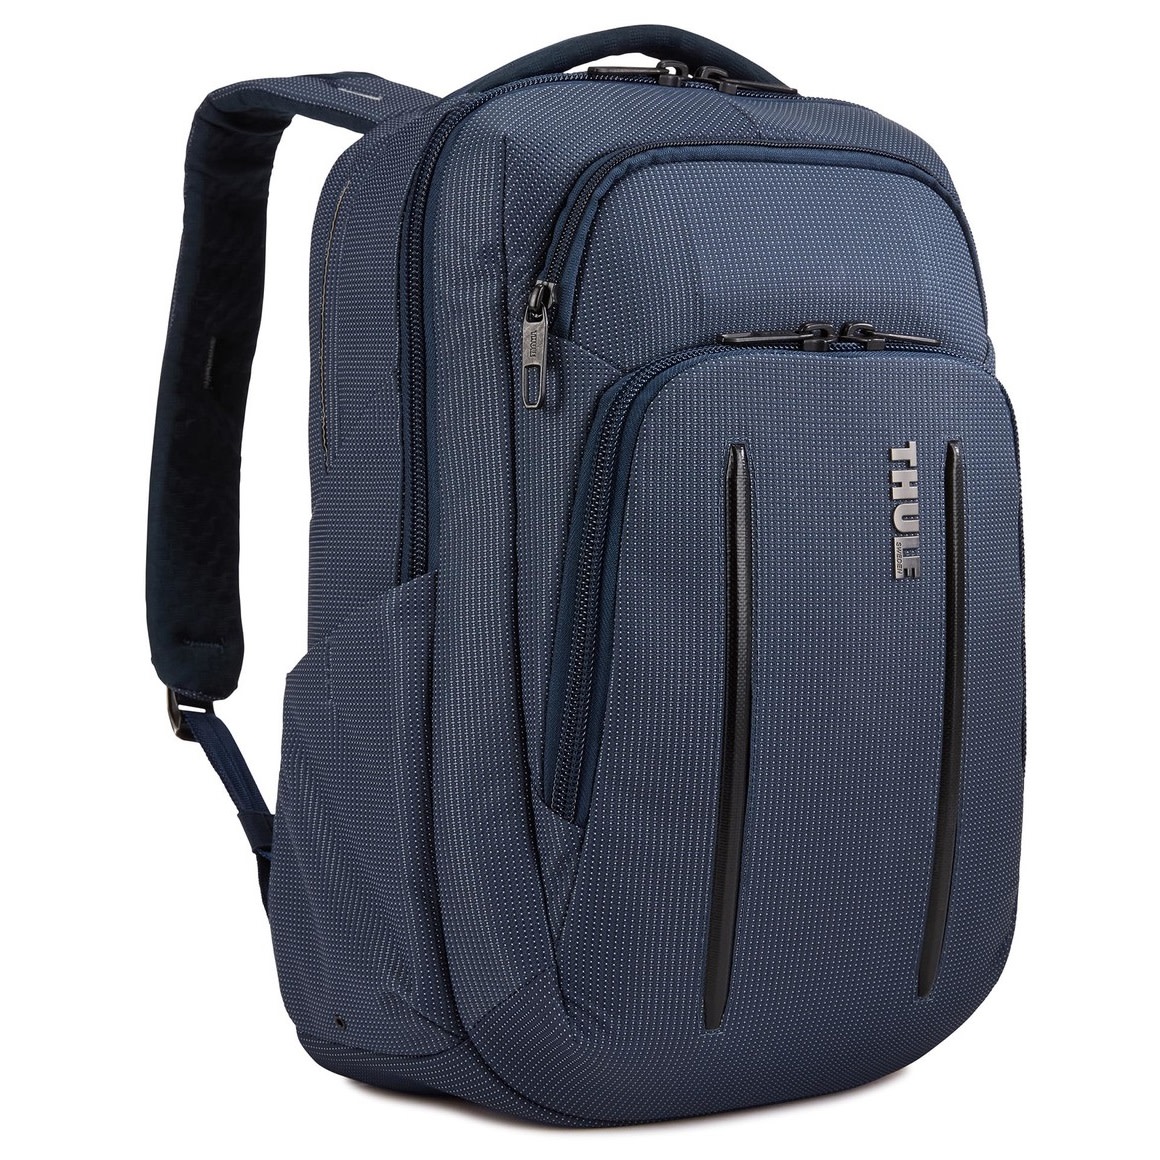 Thule Crossover 2 Backpack 20L DarkBlue